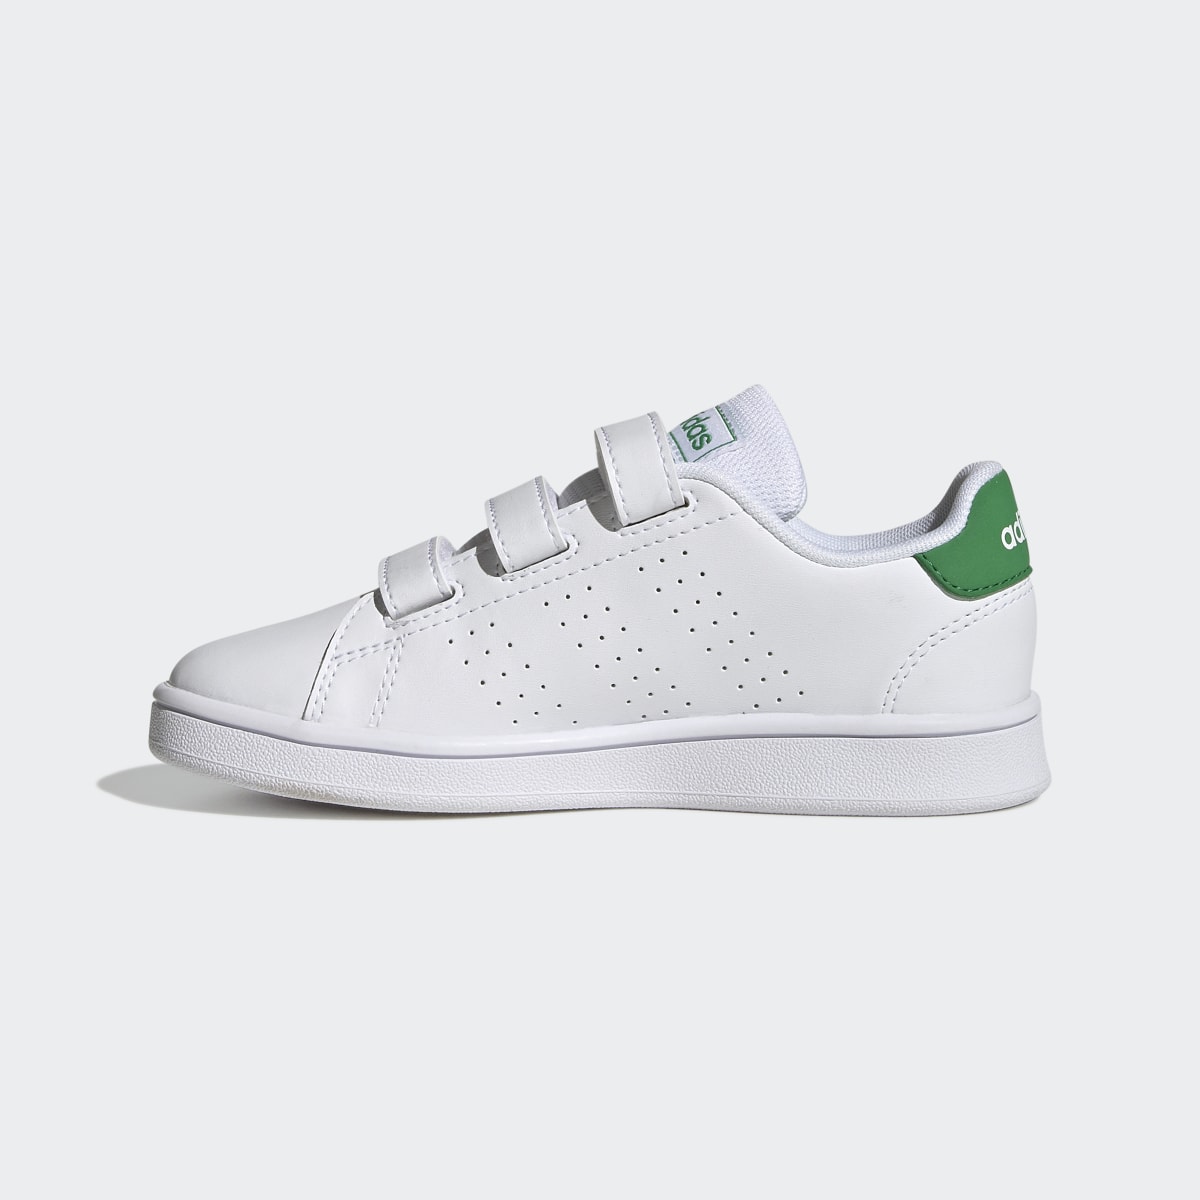 Adidas Advantage Court Lifestyle Hook-and-Loop Shoes. 7